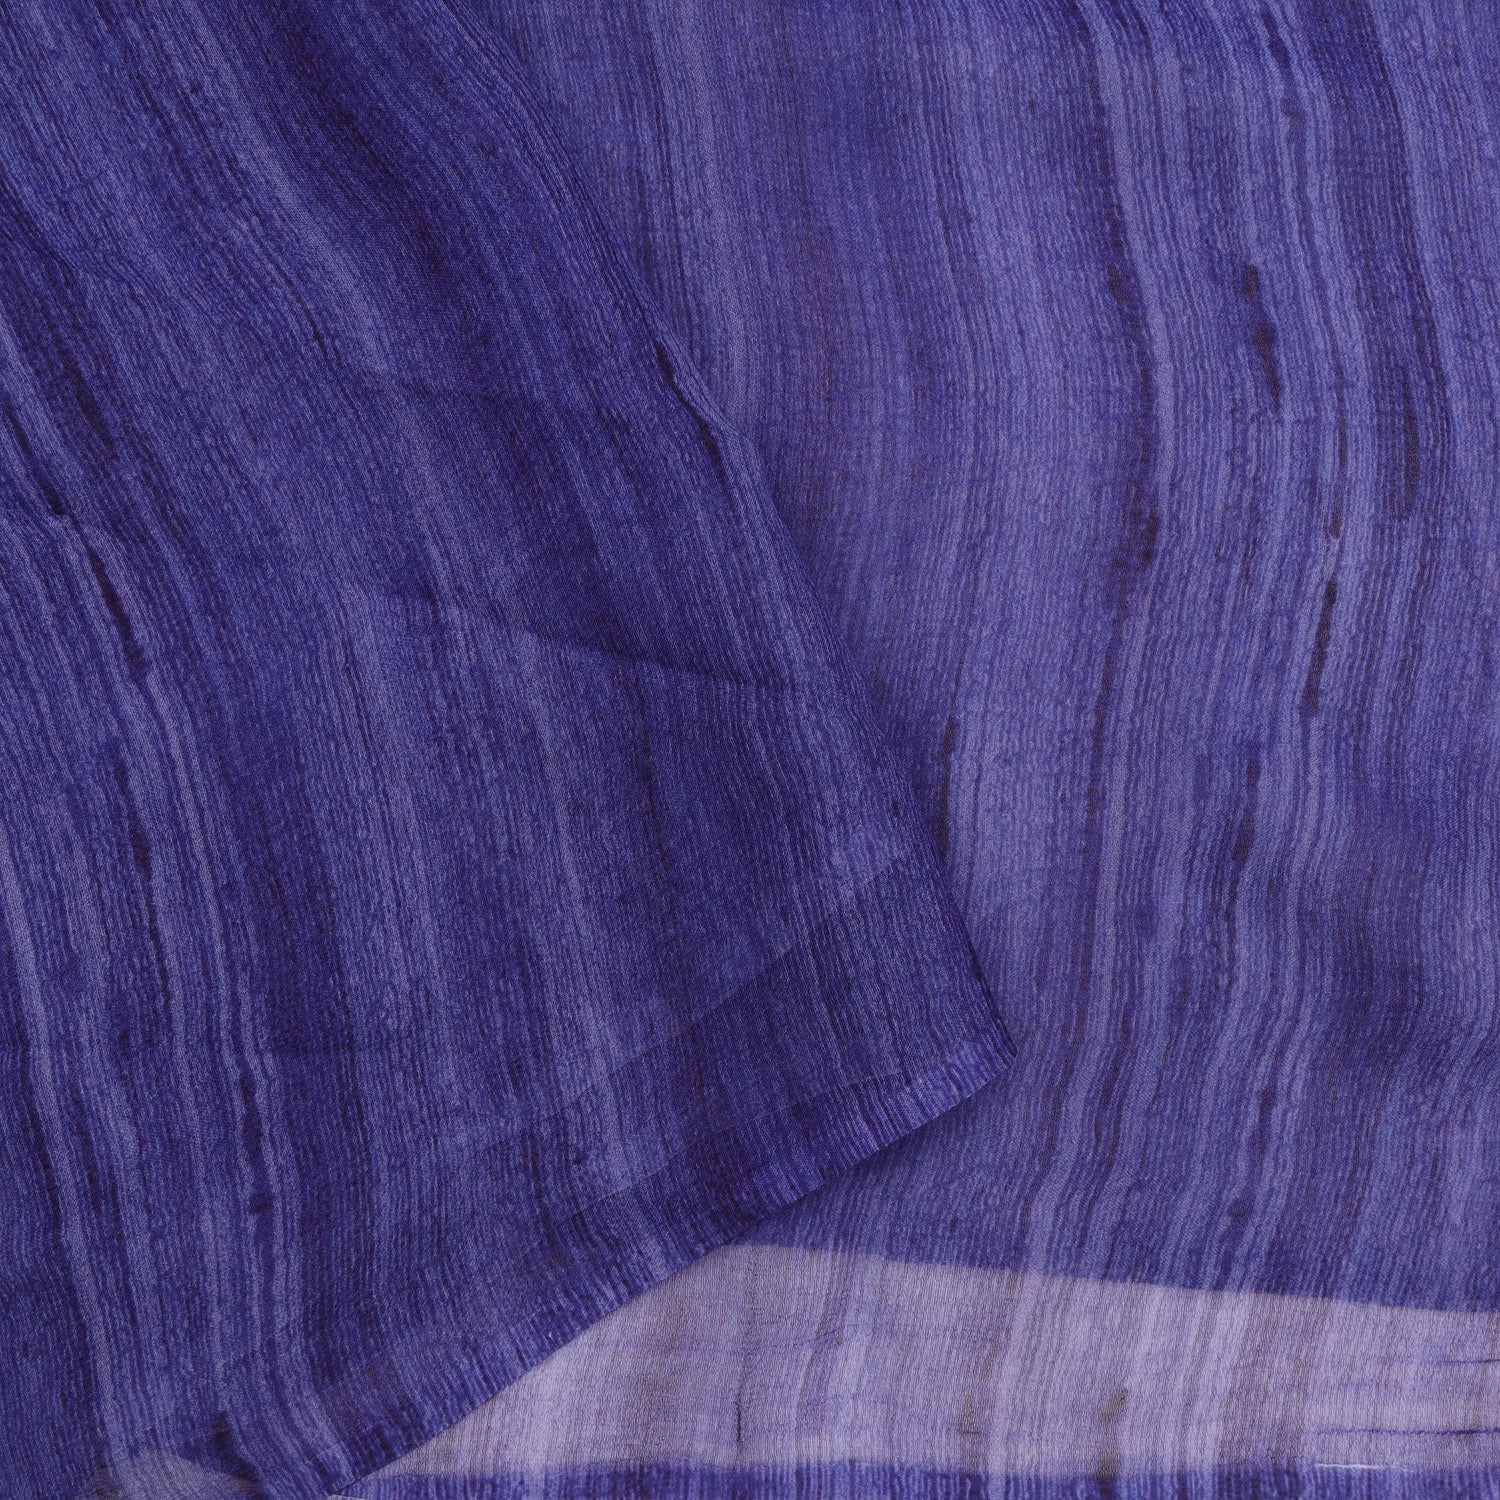 Violet Georgette Saree With Striped Printed Pattern - Singhania's